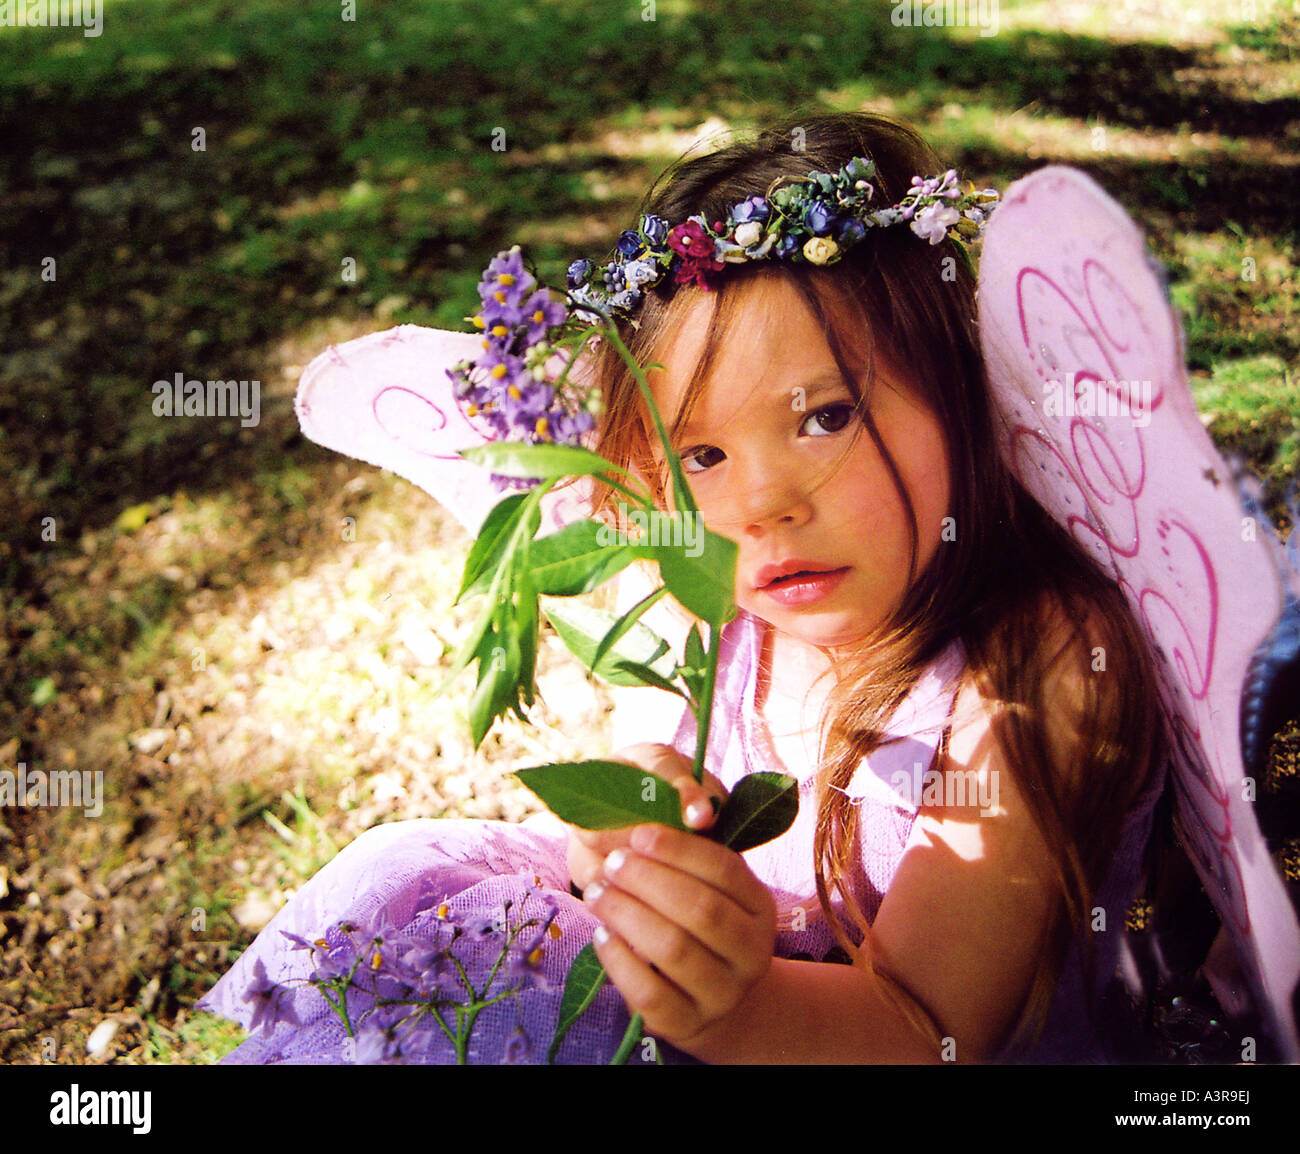 beautiful child offering a flower Stock Photo